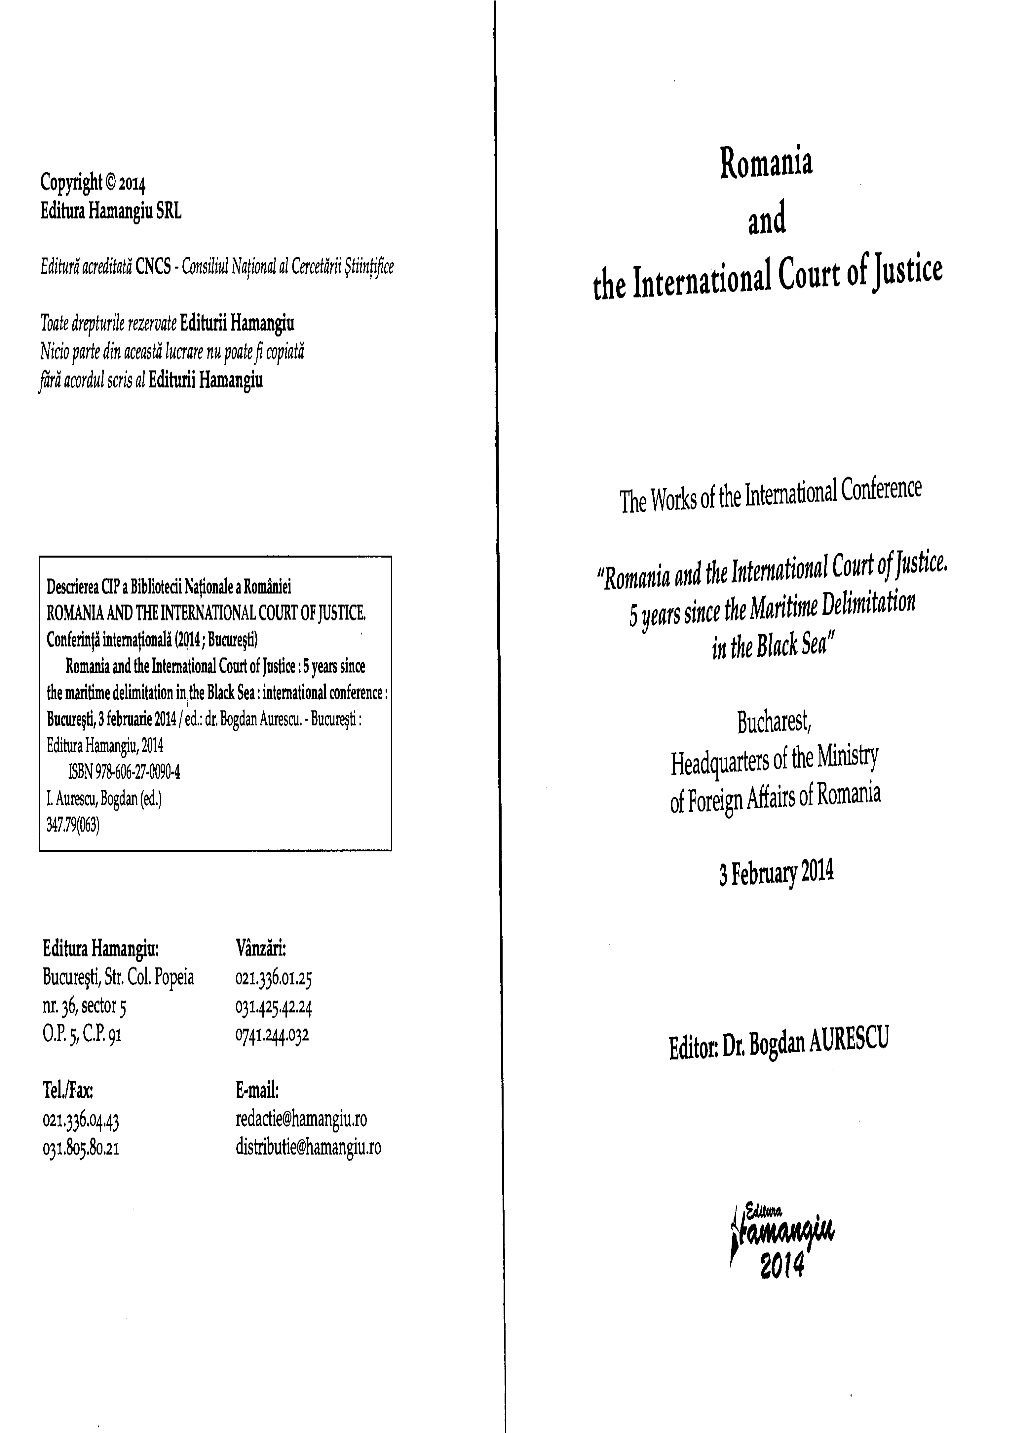 Romania and the International Court of Justice